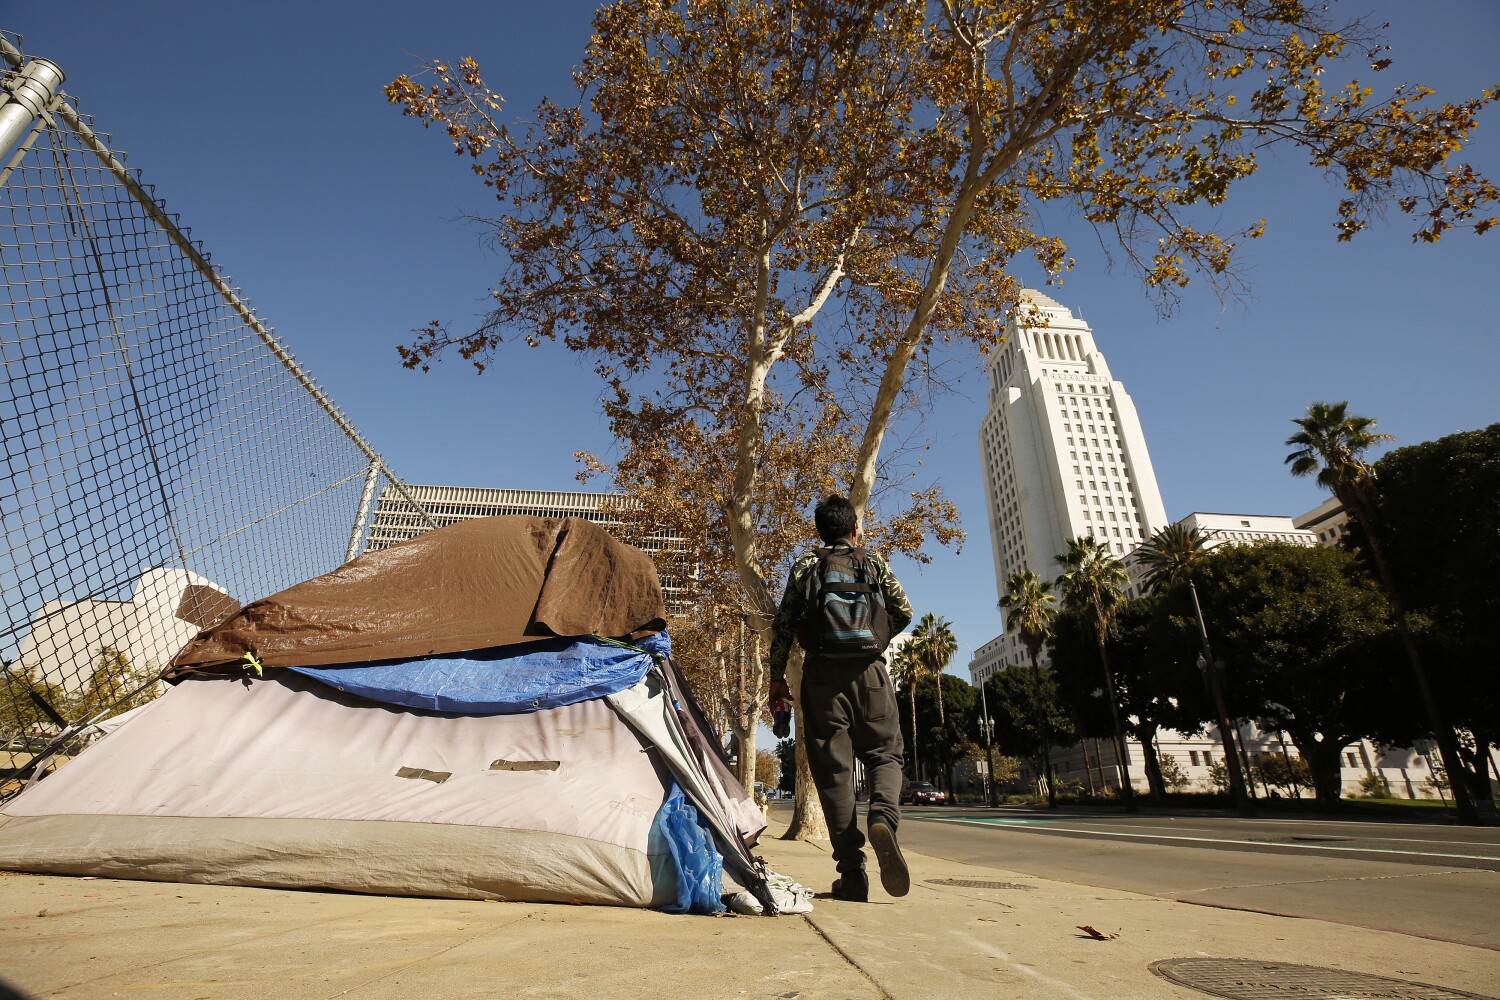 Tax proposed on L.A. property sales over $5 million to fund homeless housing